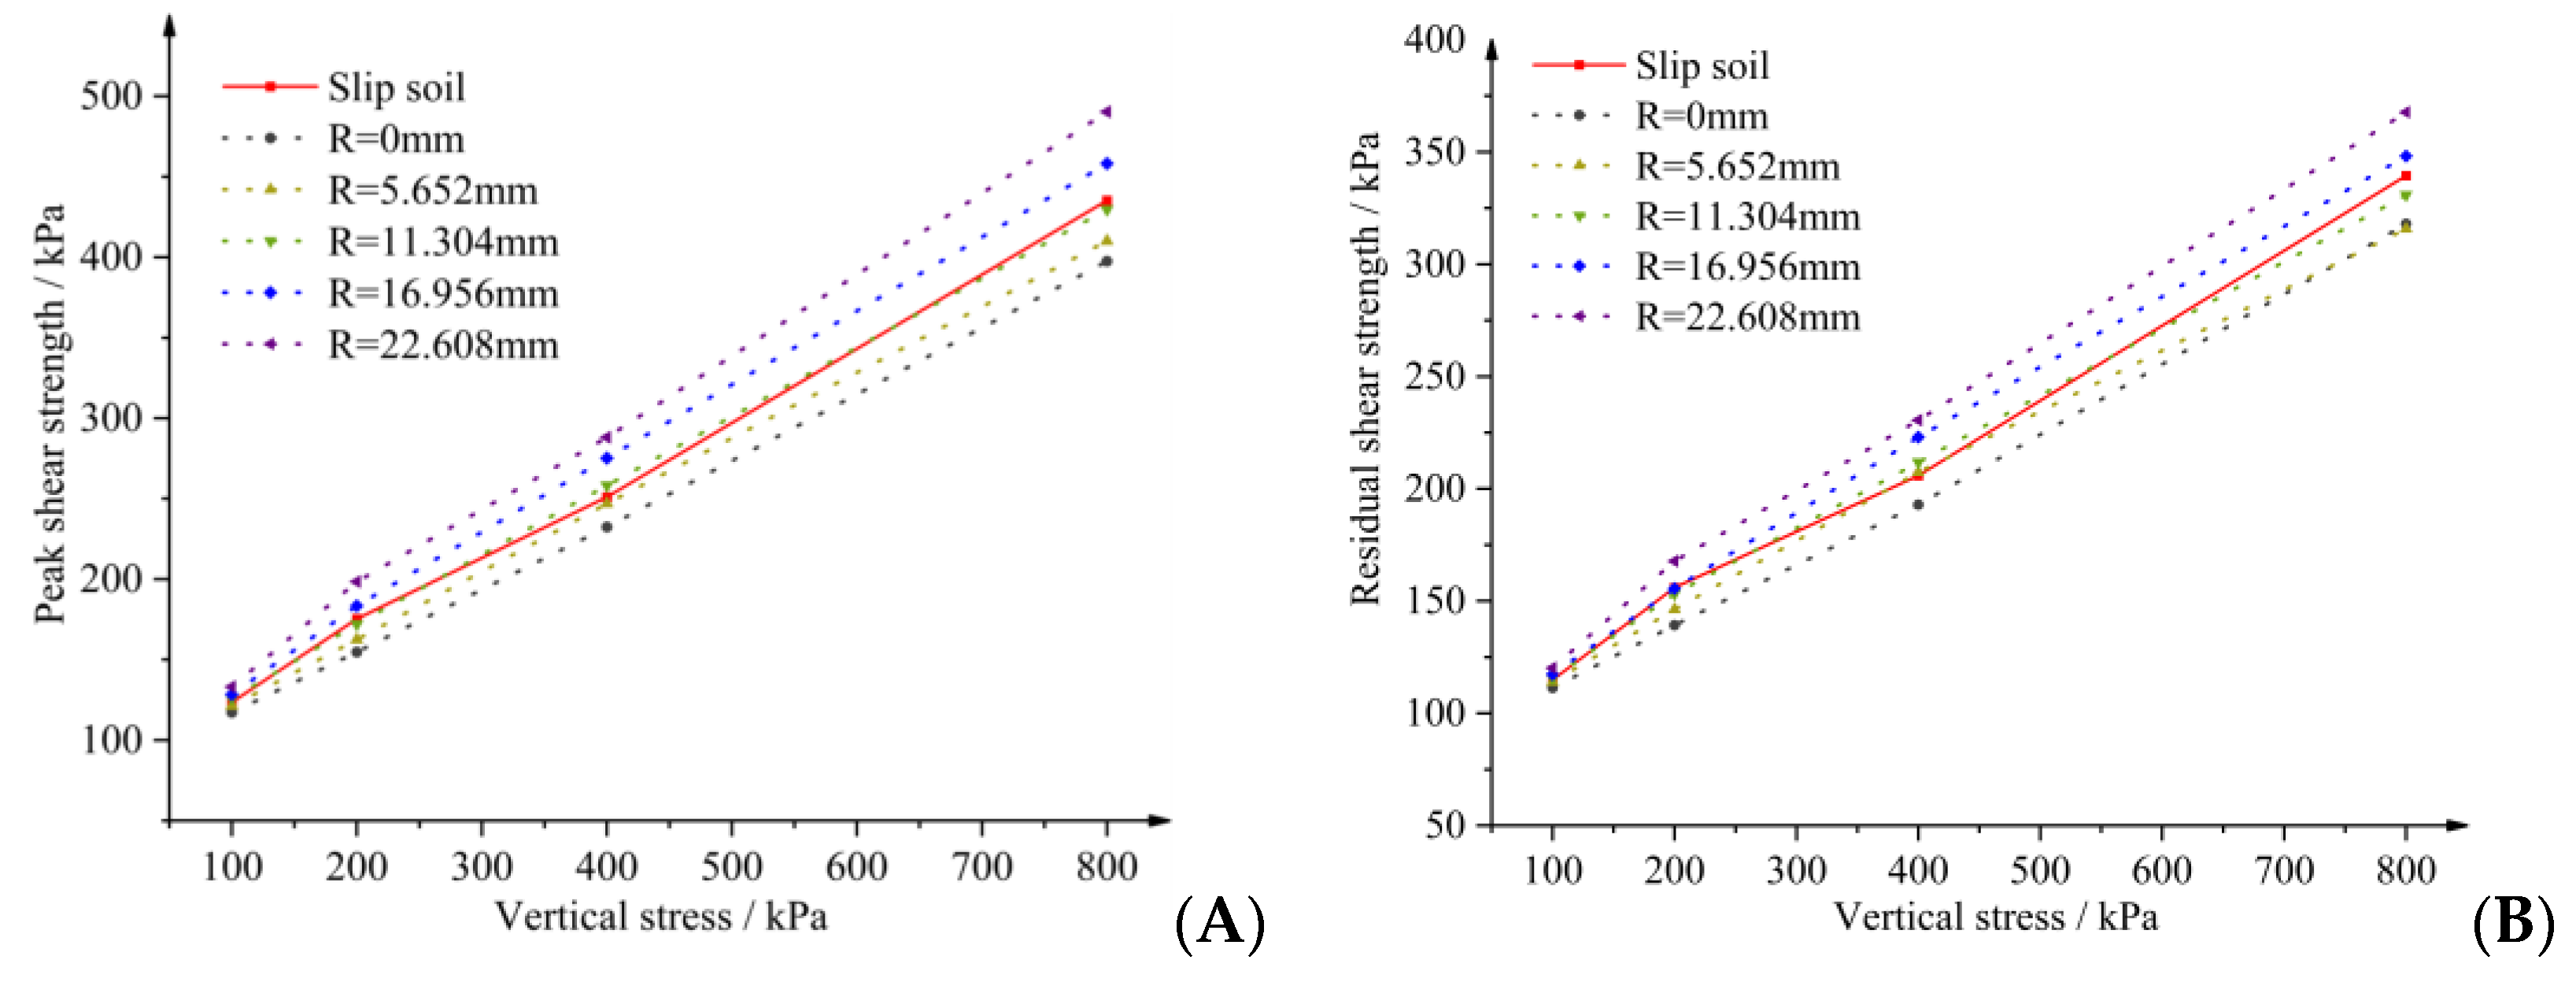 Effects of Soil Strength Nonlinearity on Slip Surfaces of